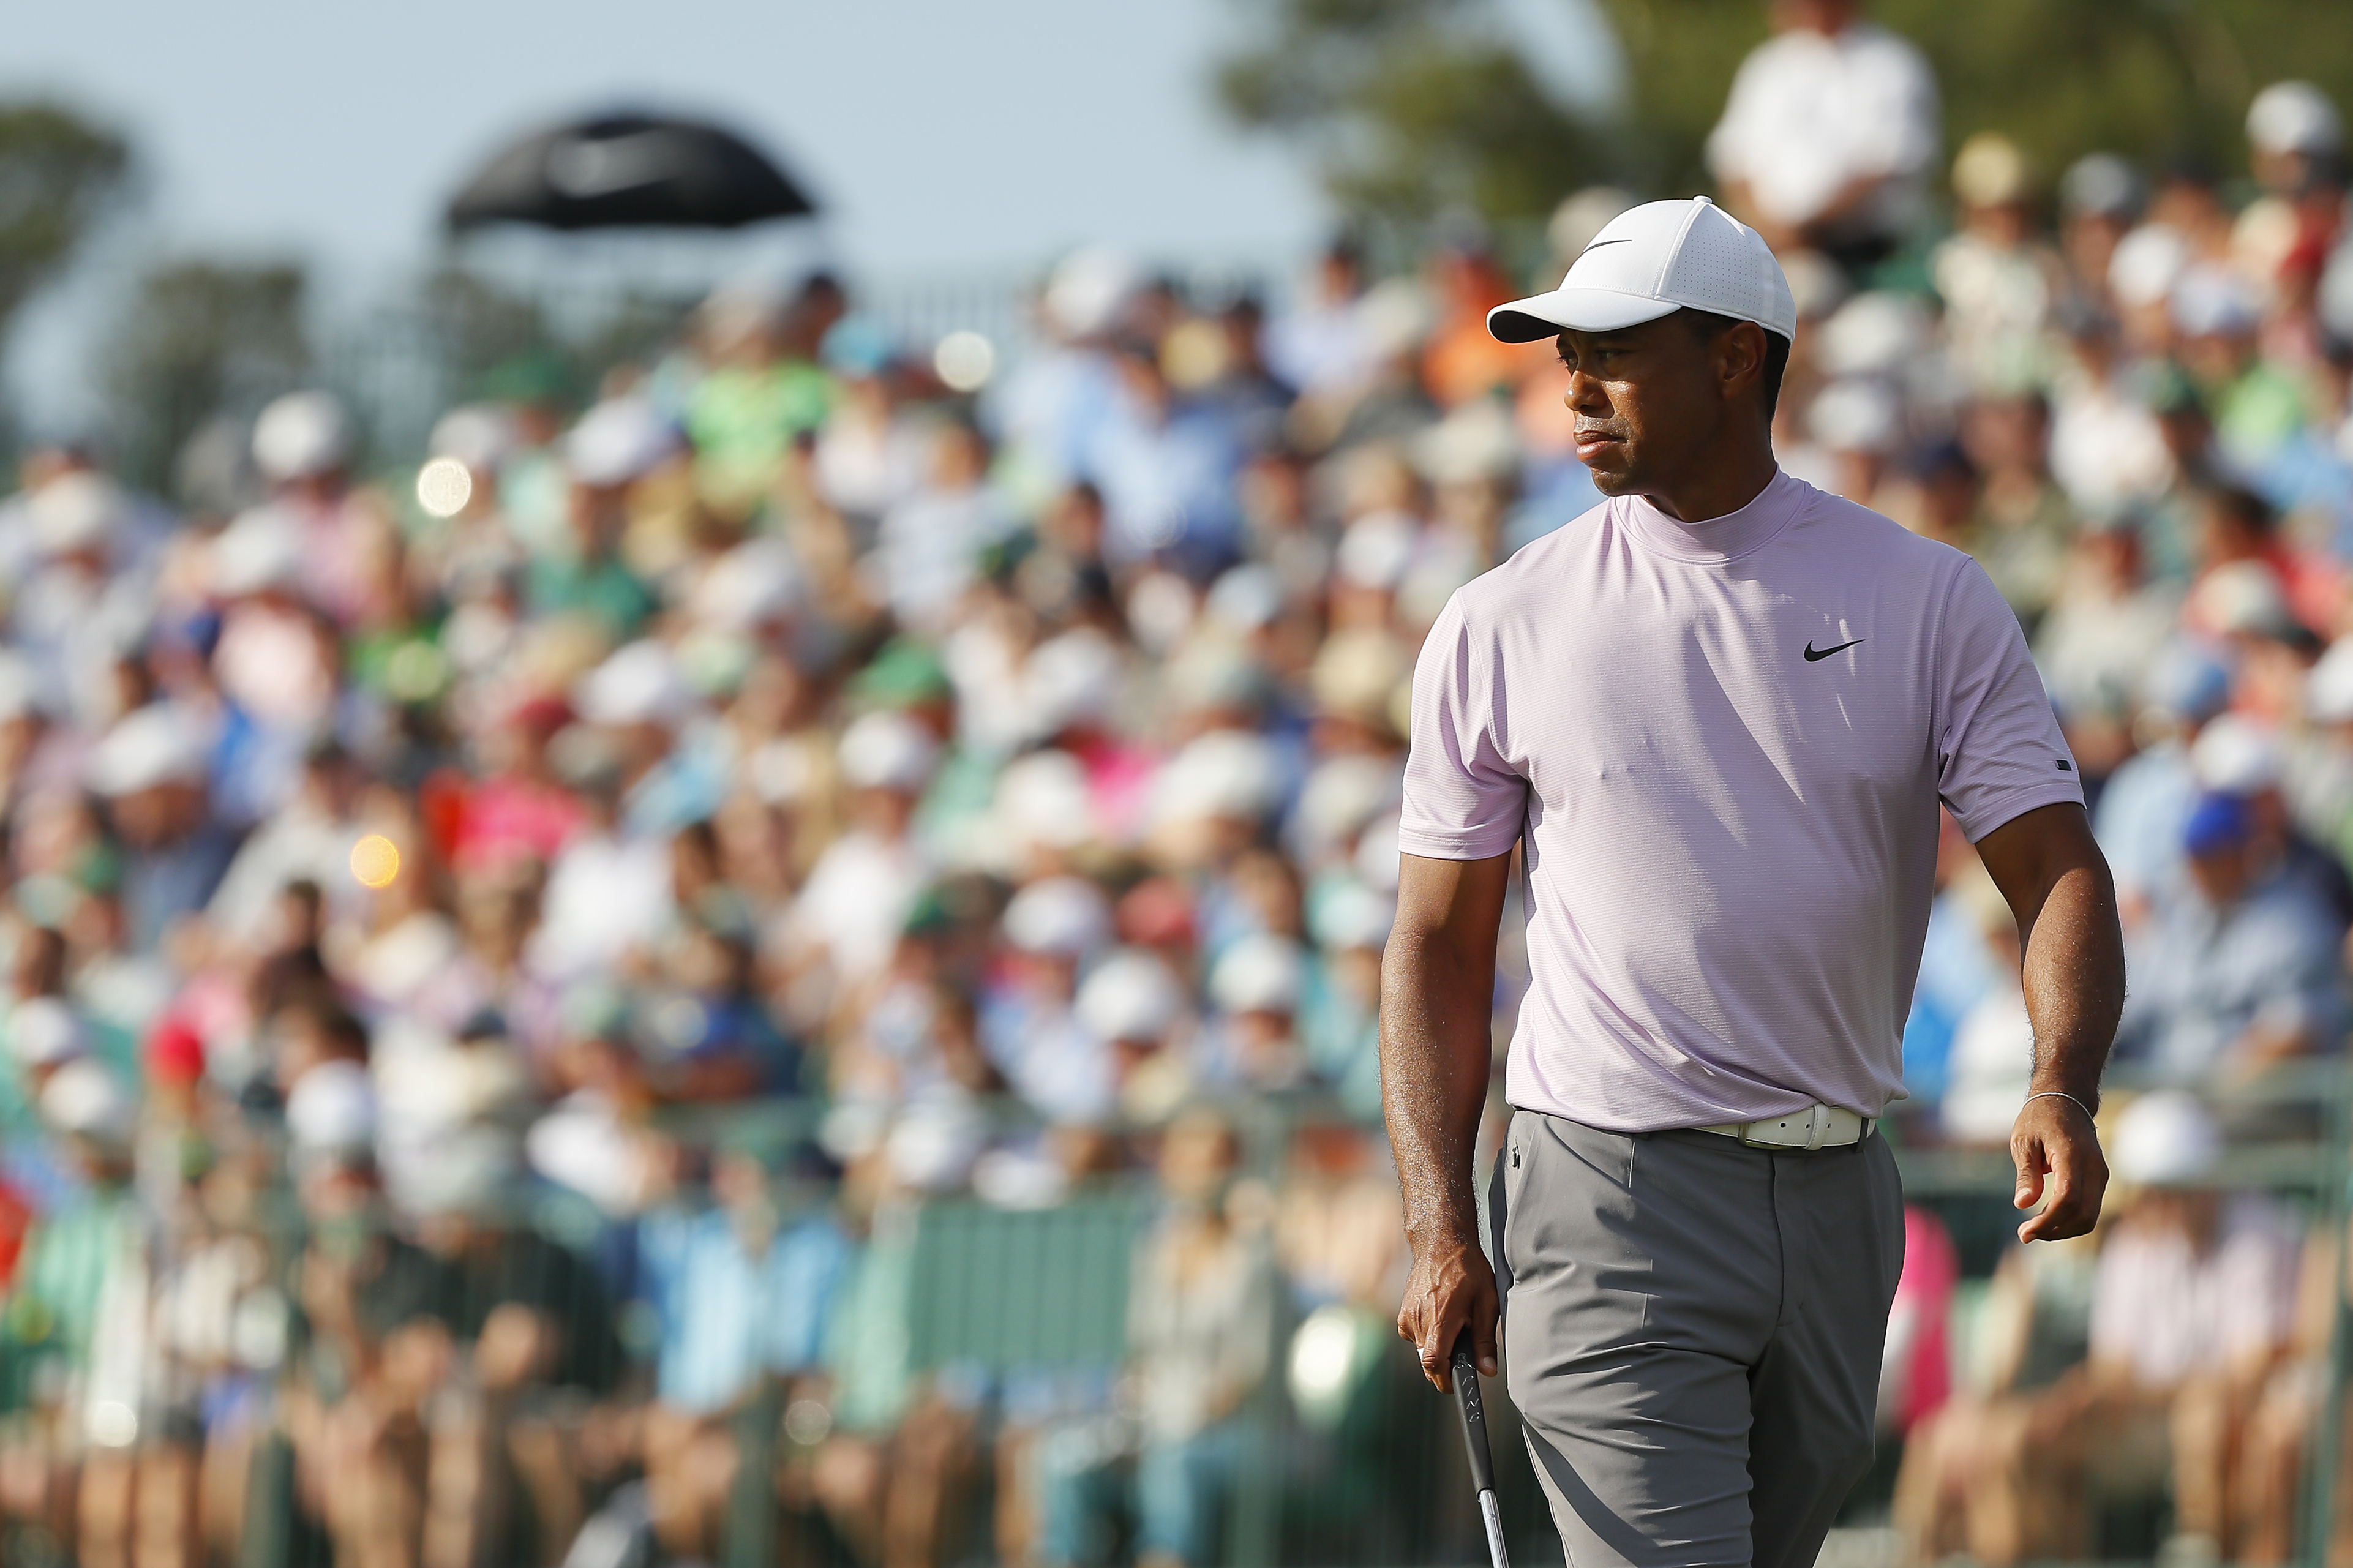 Masters 2019 Live Blog Tiger Woods Cards Five Under 67 His Lowest Round At Augusta Since 2011 Trails Francesco Molinari By Two Golf News And Tour Information Golf Digest